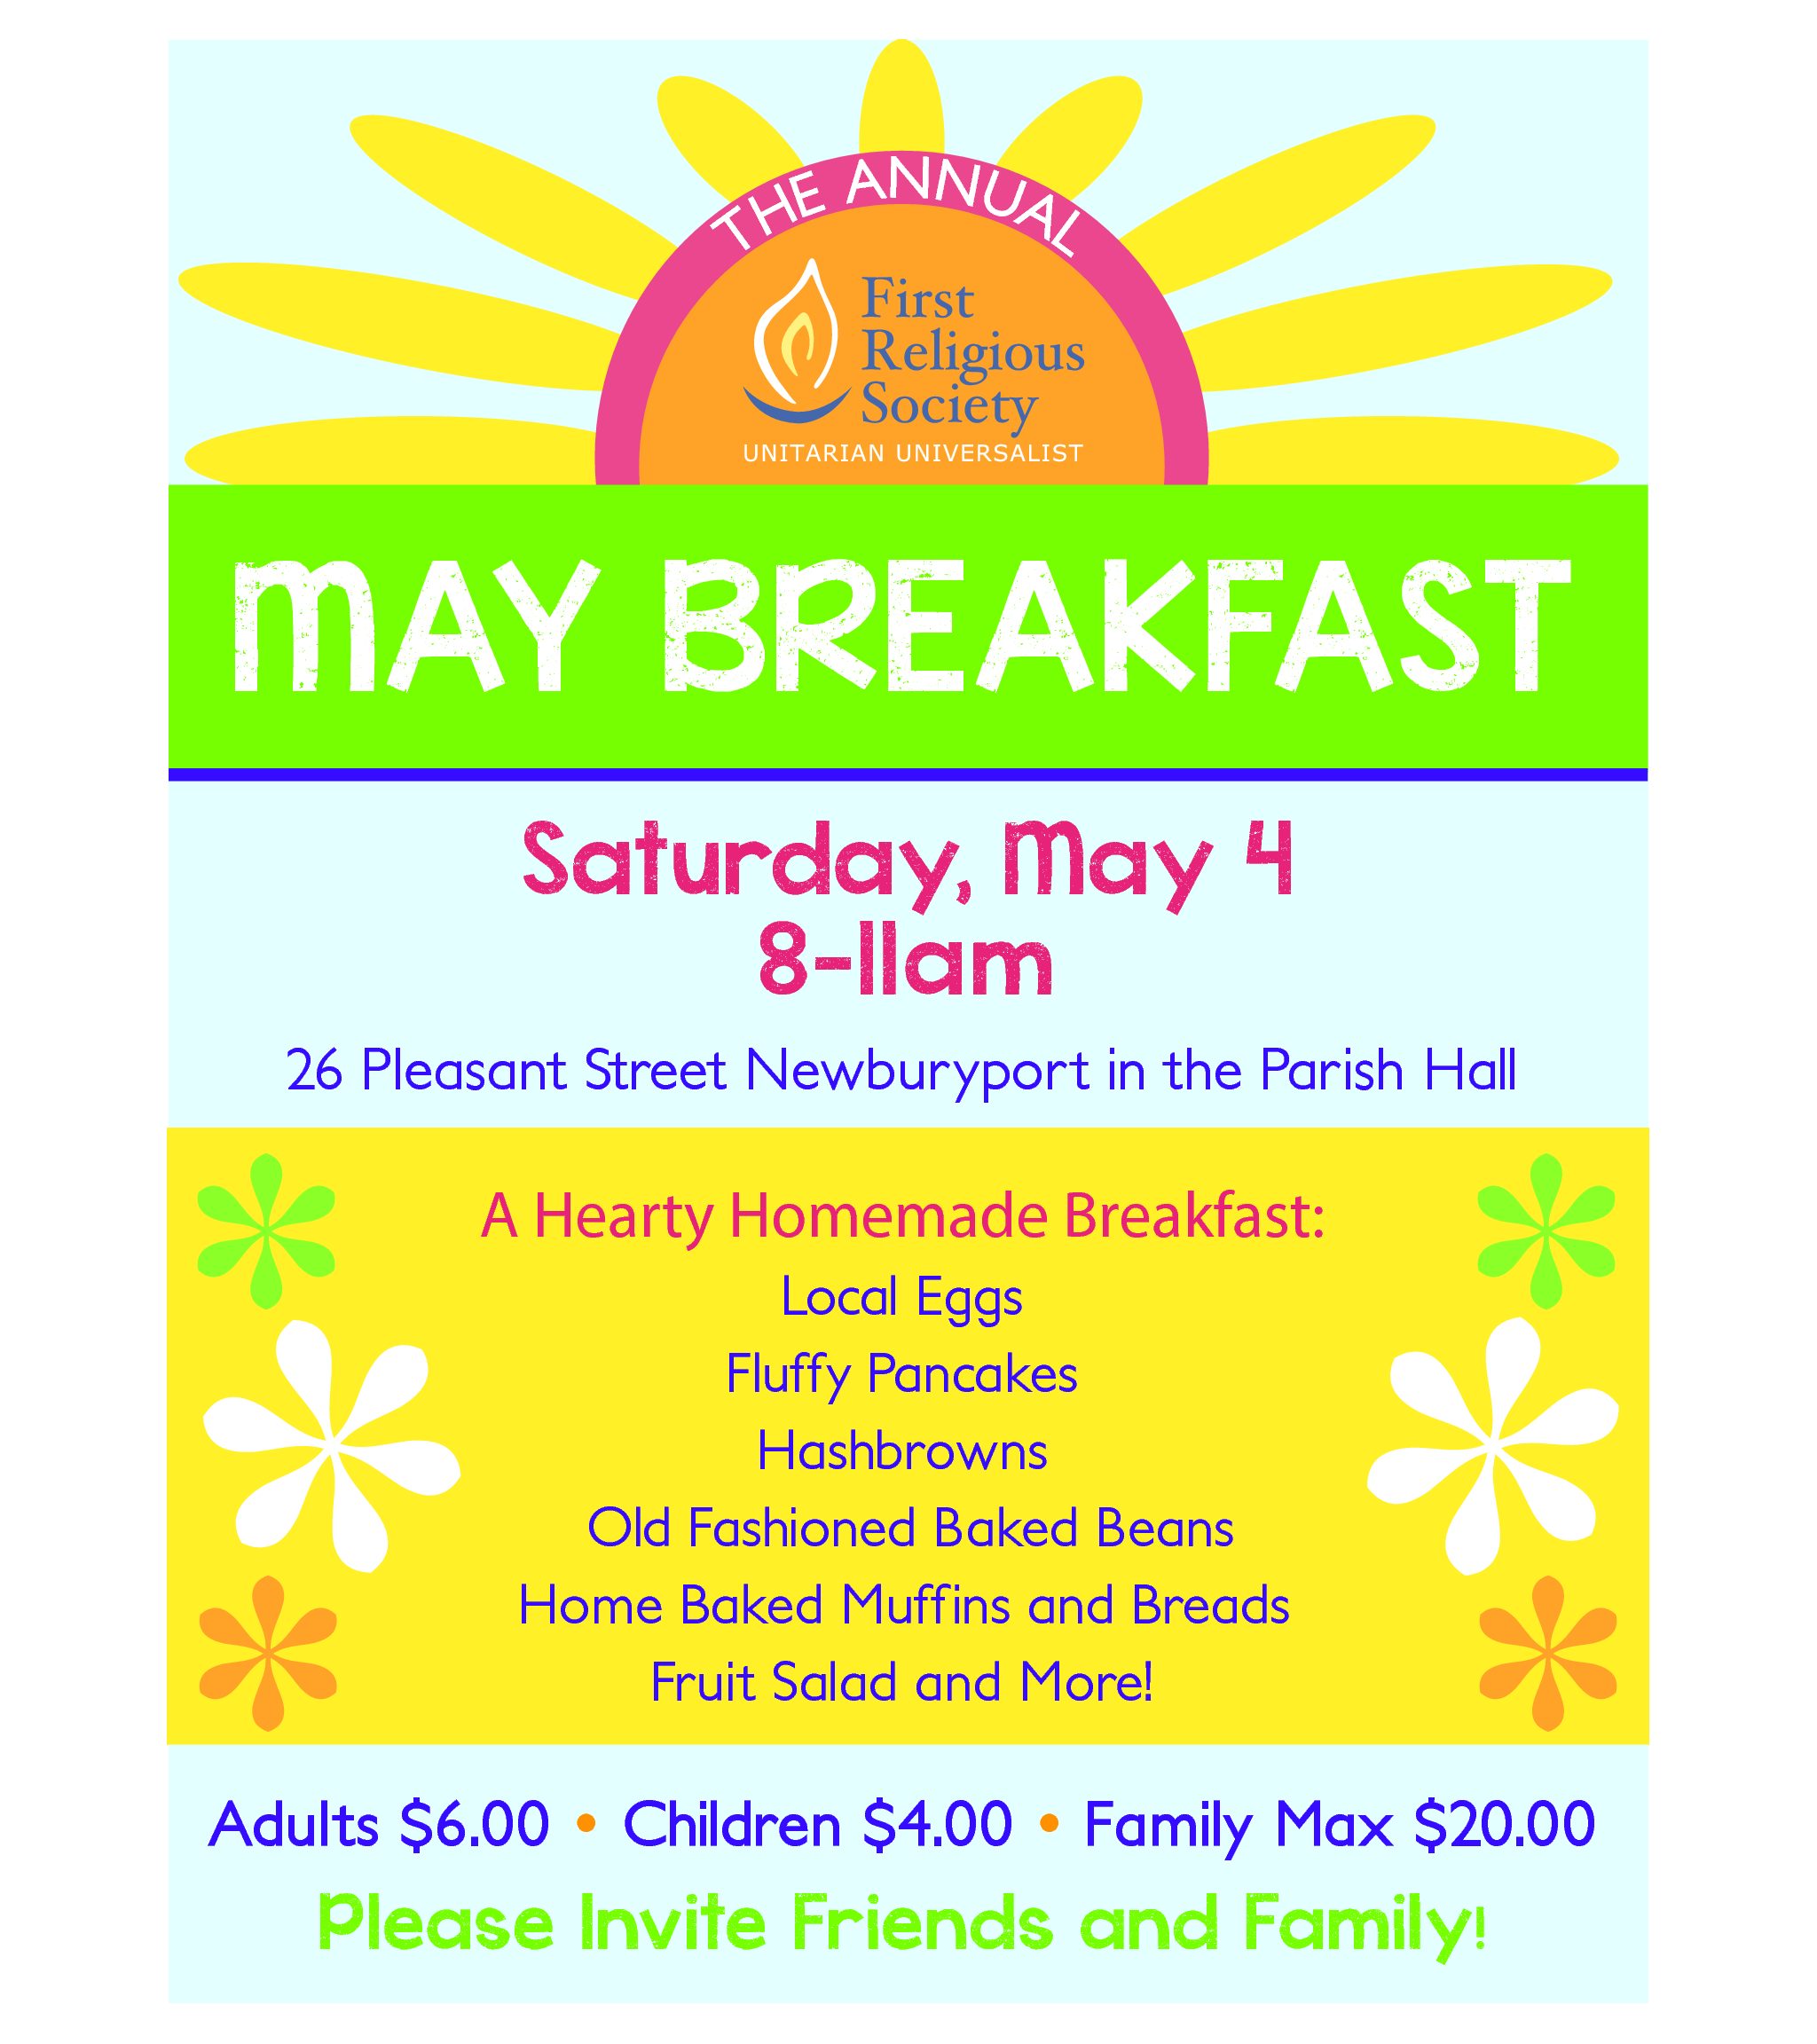 Get Ready for Deliciousness! May Breakfast, Saturday May 4 – Bring your family and friends!